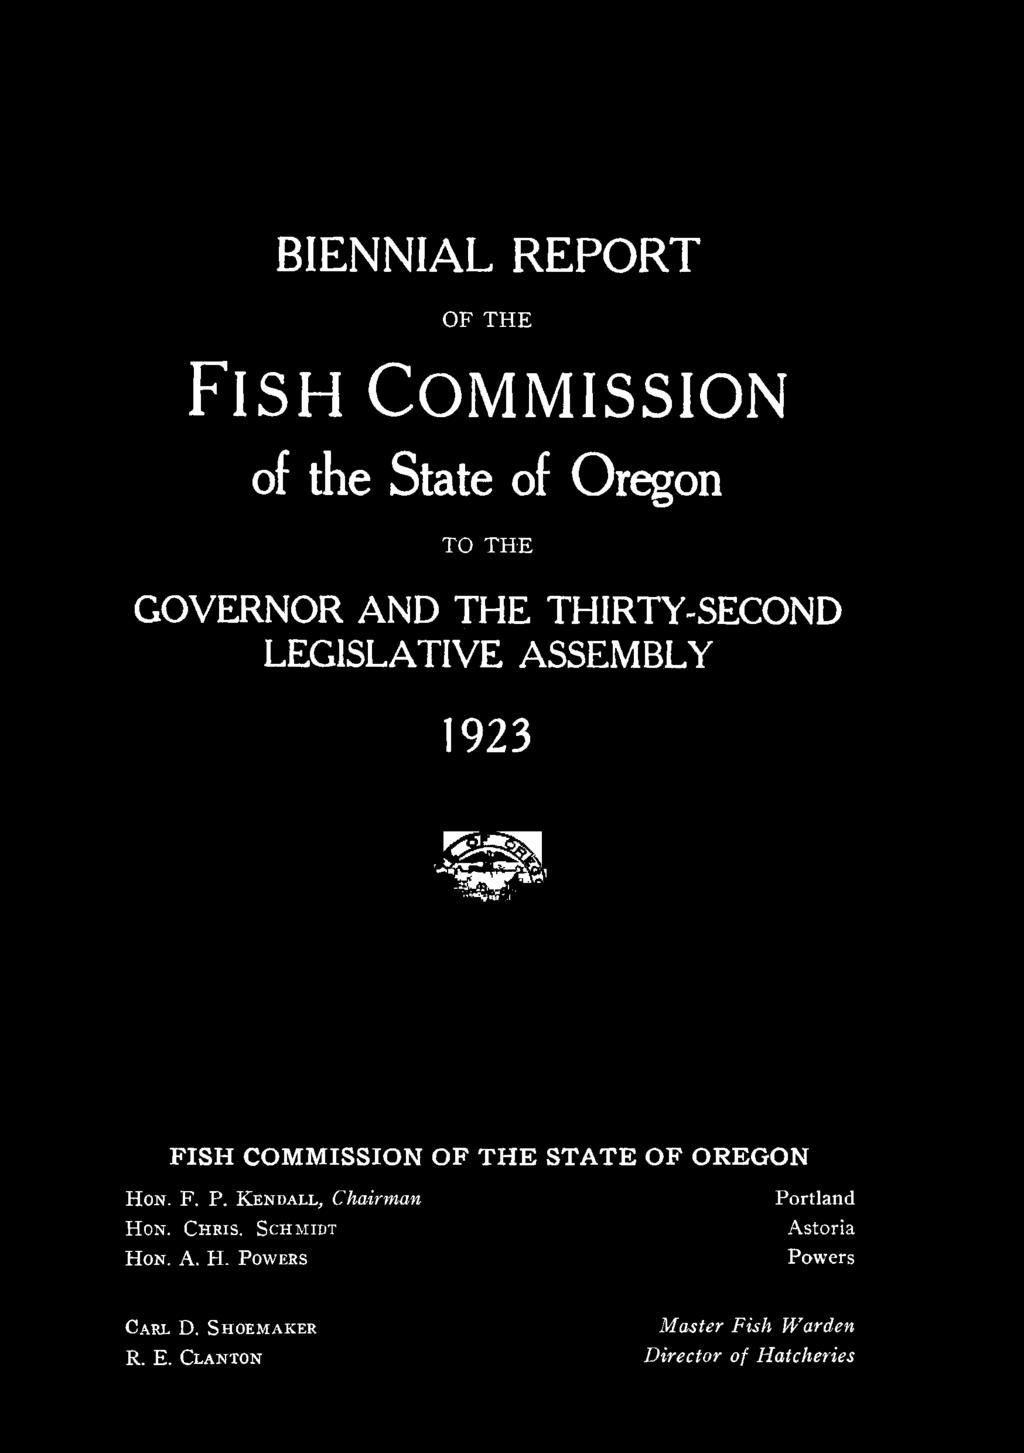 BIENNIAL REPORT OF THE FISH COMMISSION of the State of Oregon TO THE GOVERNOR AND THE THIRTY-SECOND LEGISLATIVE ASSEMBLY 1923 FISH COMMISSION OF THE STATE OF OREGON